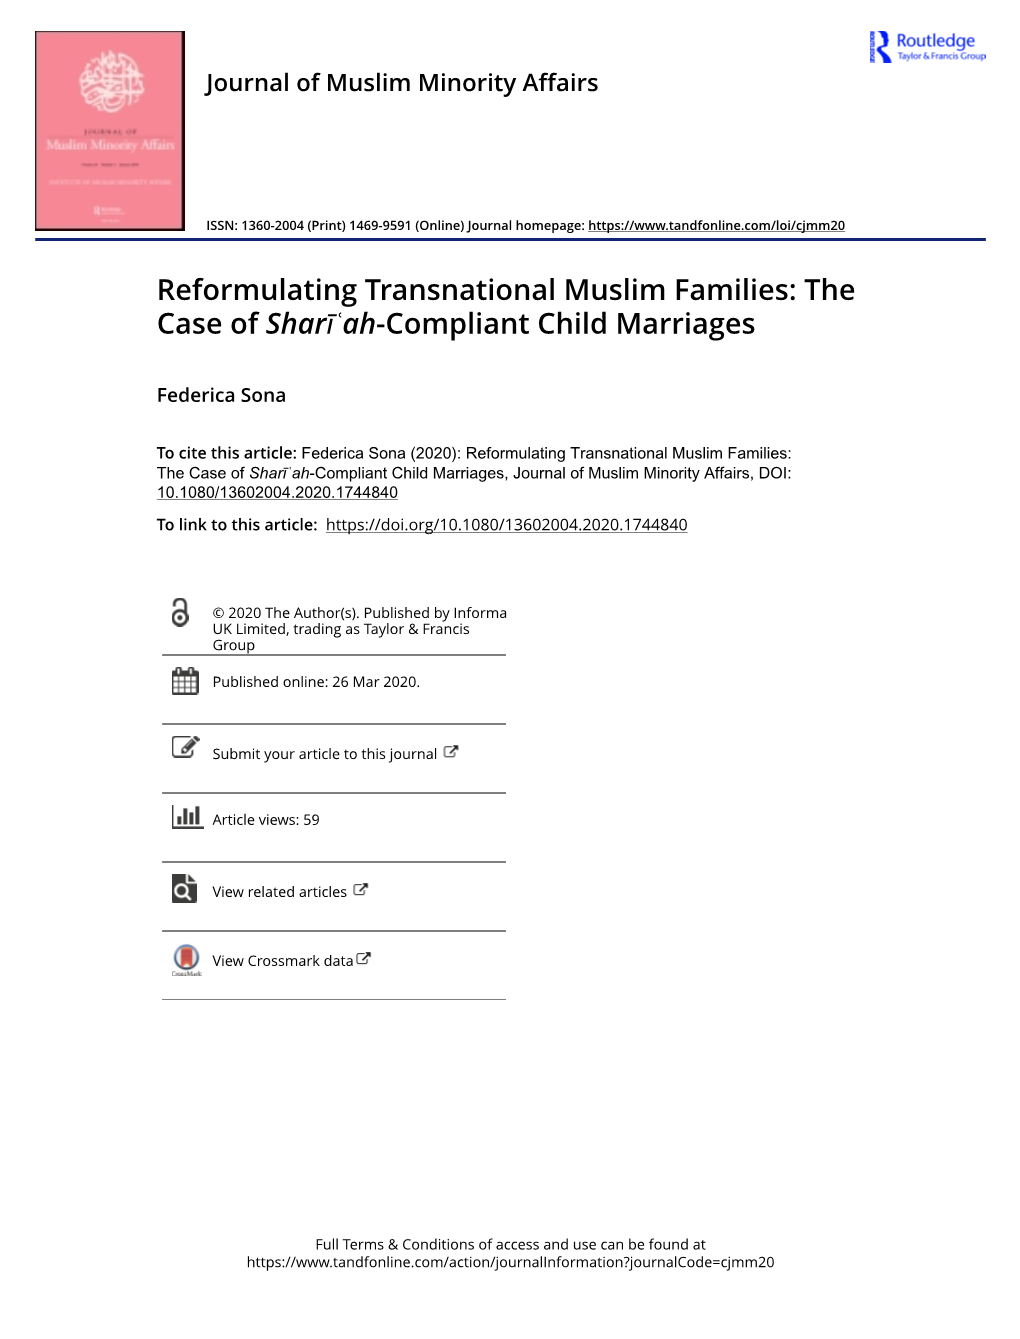 The Case of Sharīʿah-Compliant Child Marriages